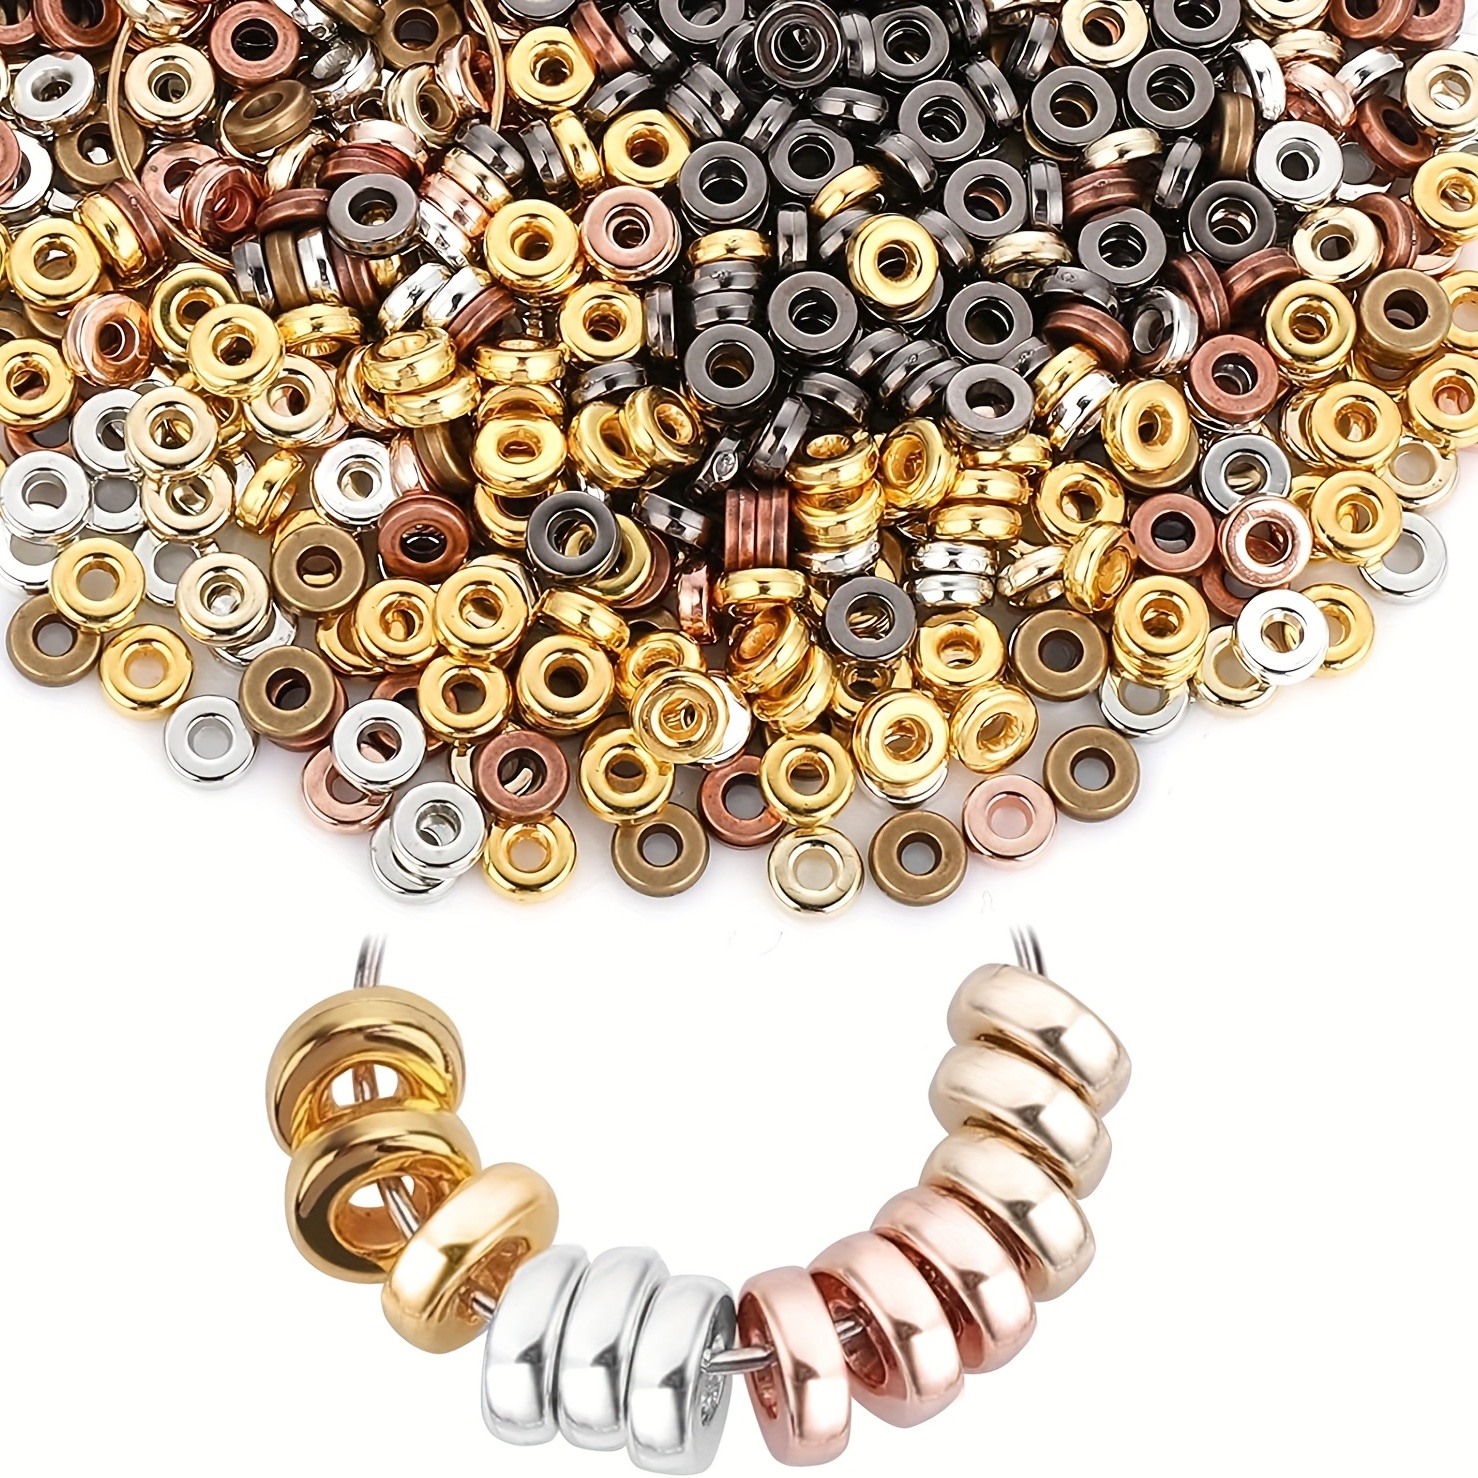  2160 Pieces Gold Spacer Beads Set, Assorted Round Star